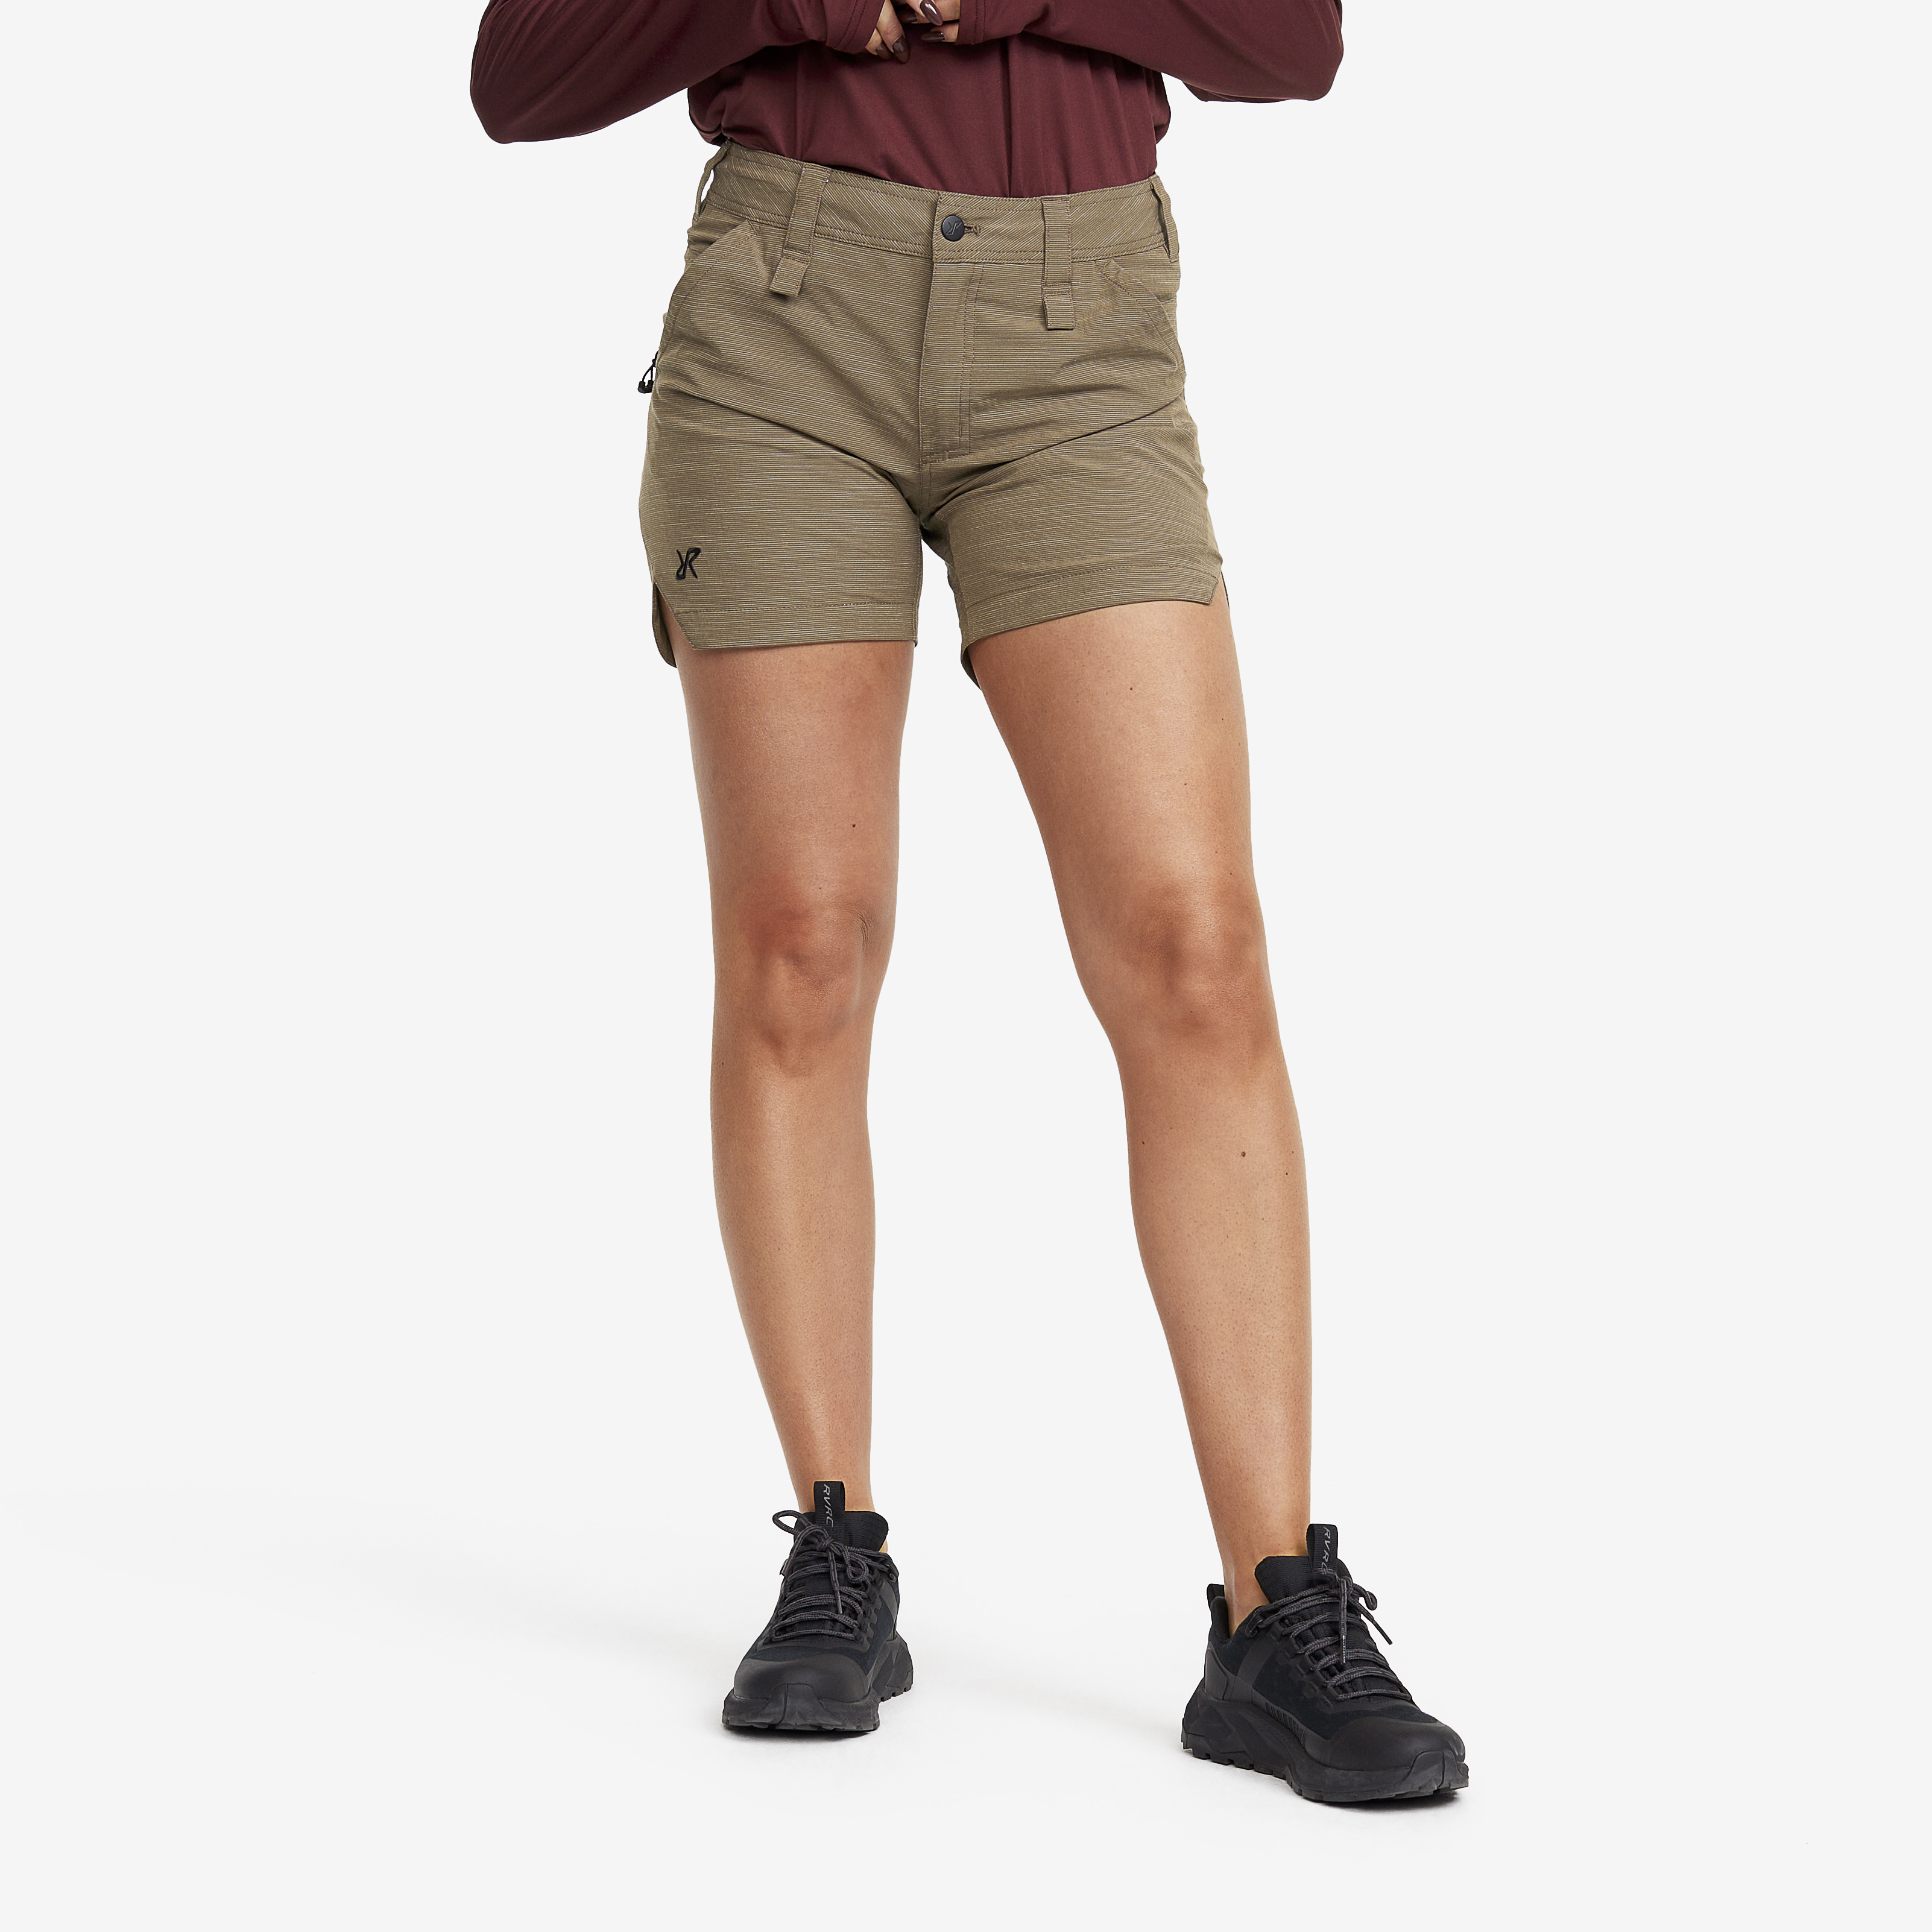 Hike & Dive Shorts Chocolate Chip Mujeres